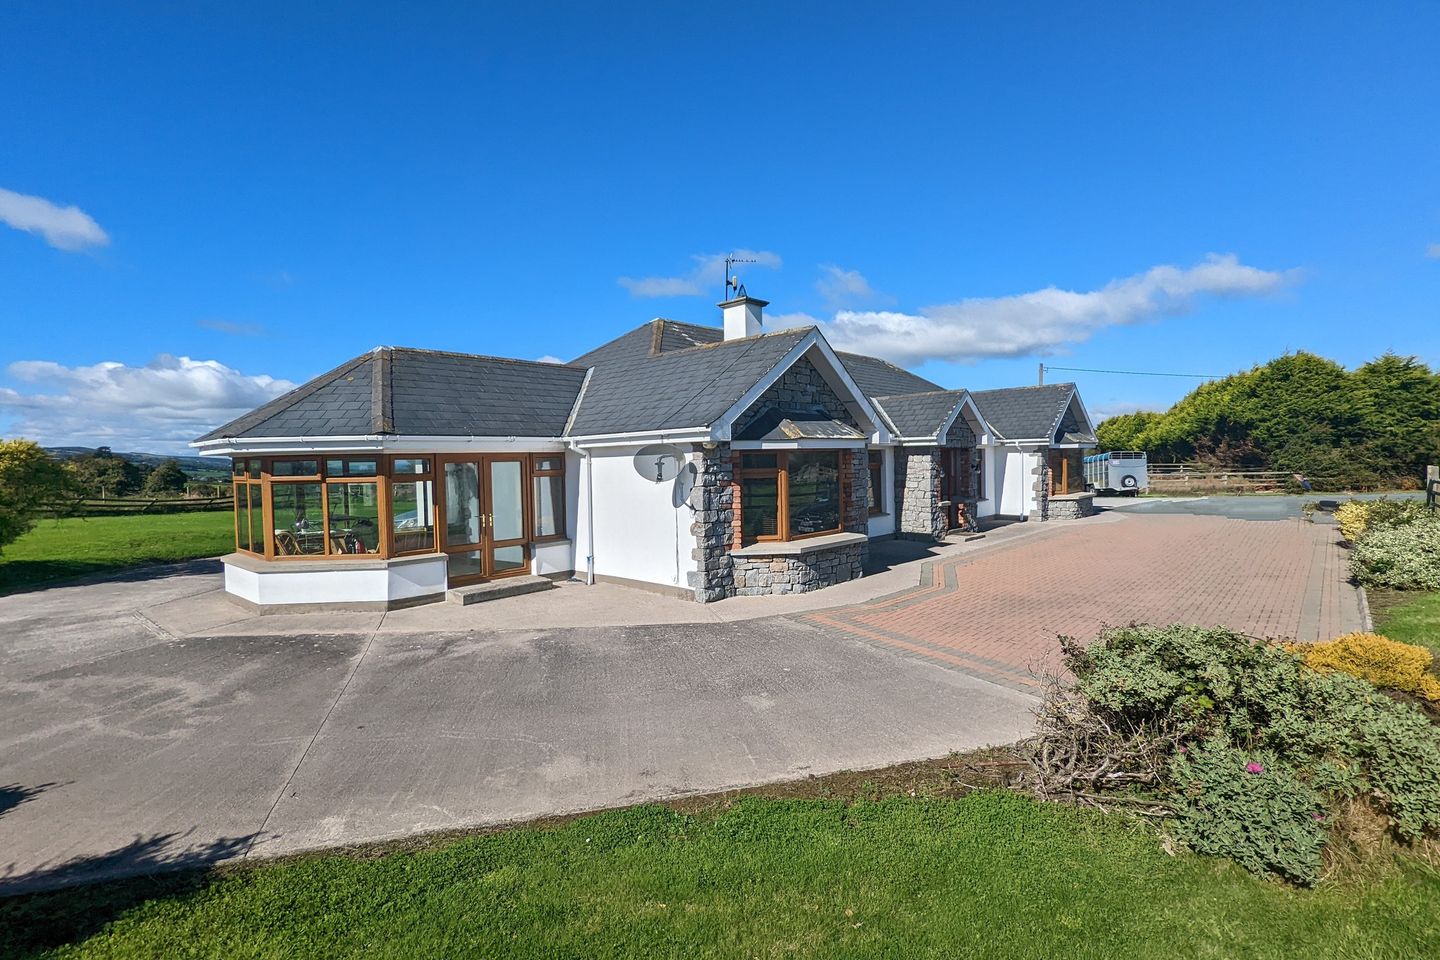 Ballynacourty South, Ring, Dungarvan, Co. Waterford, X35KP96